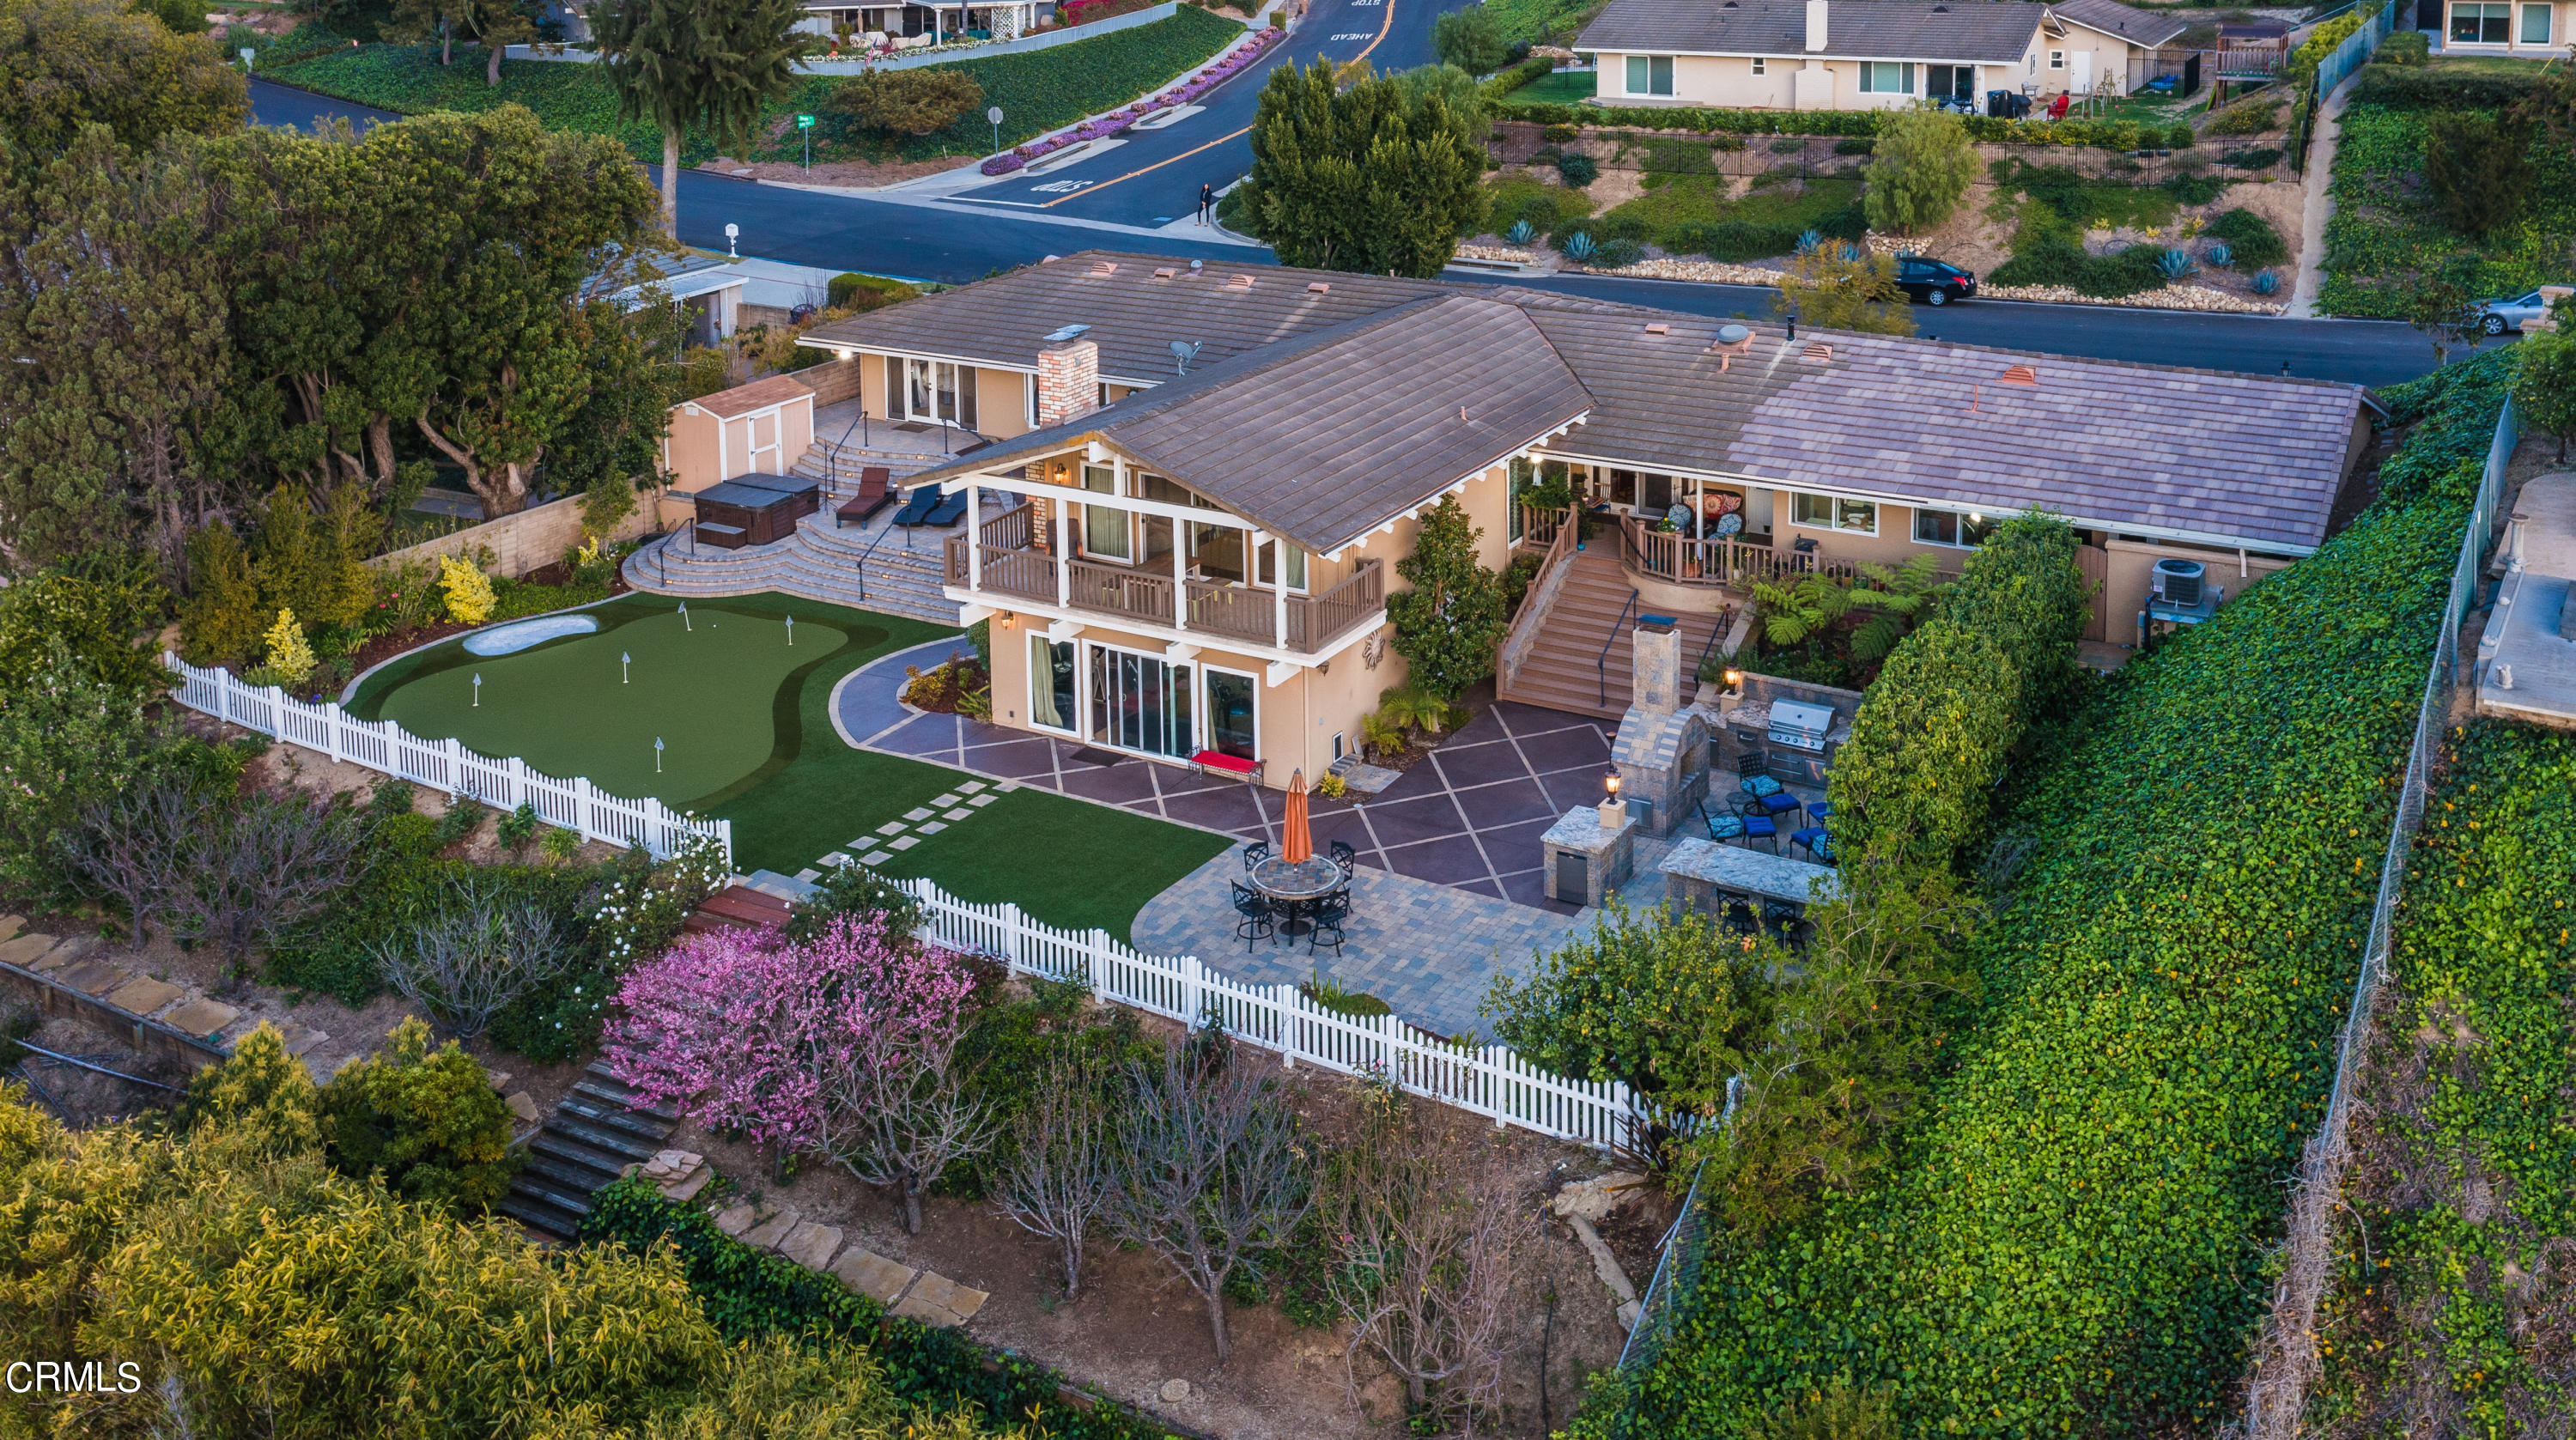 an aerial view of house with swimming pool outdoor seating and yard